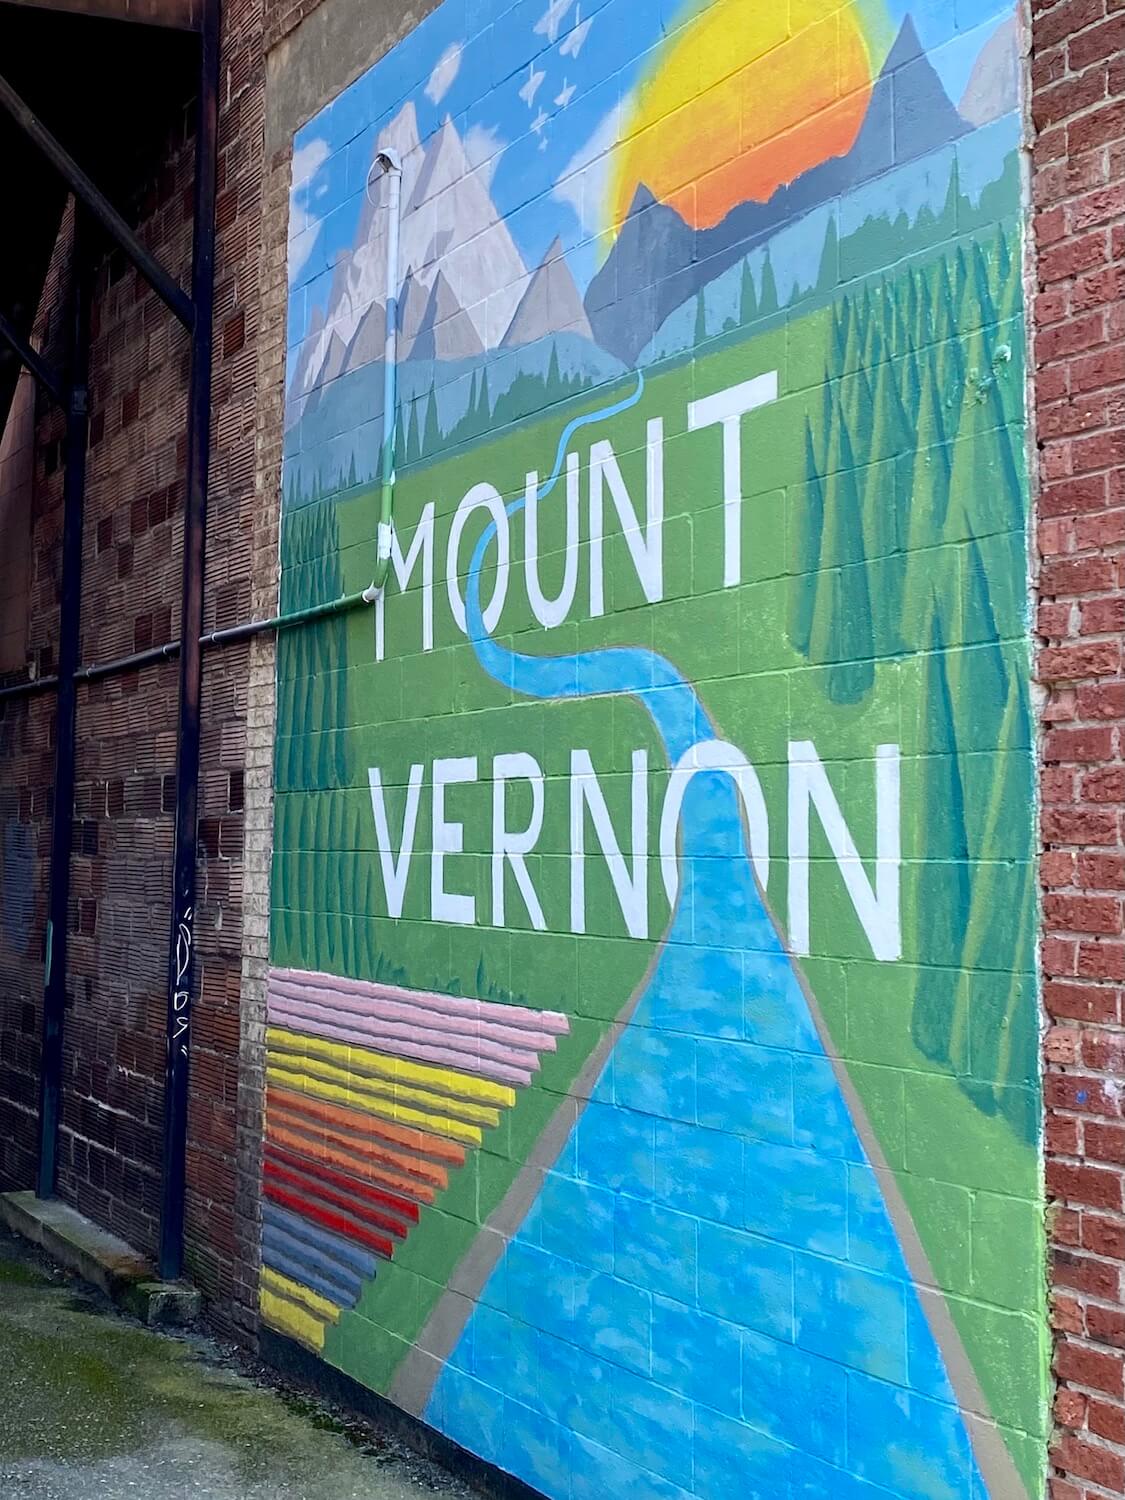 Mount Vernon Washington makes for a great stop along the Seattle to Vancouver drive because it's about halfway and there are some neat shops and restaurants. This mural on the side of a red brick building depicts the colorful nature of Mount Vernon.